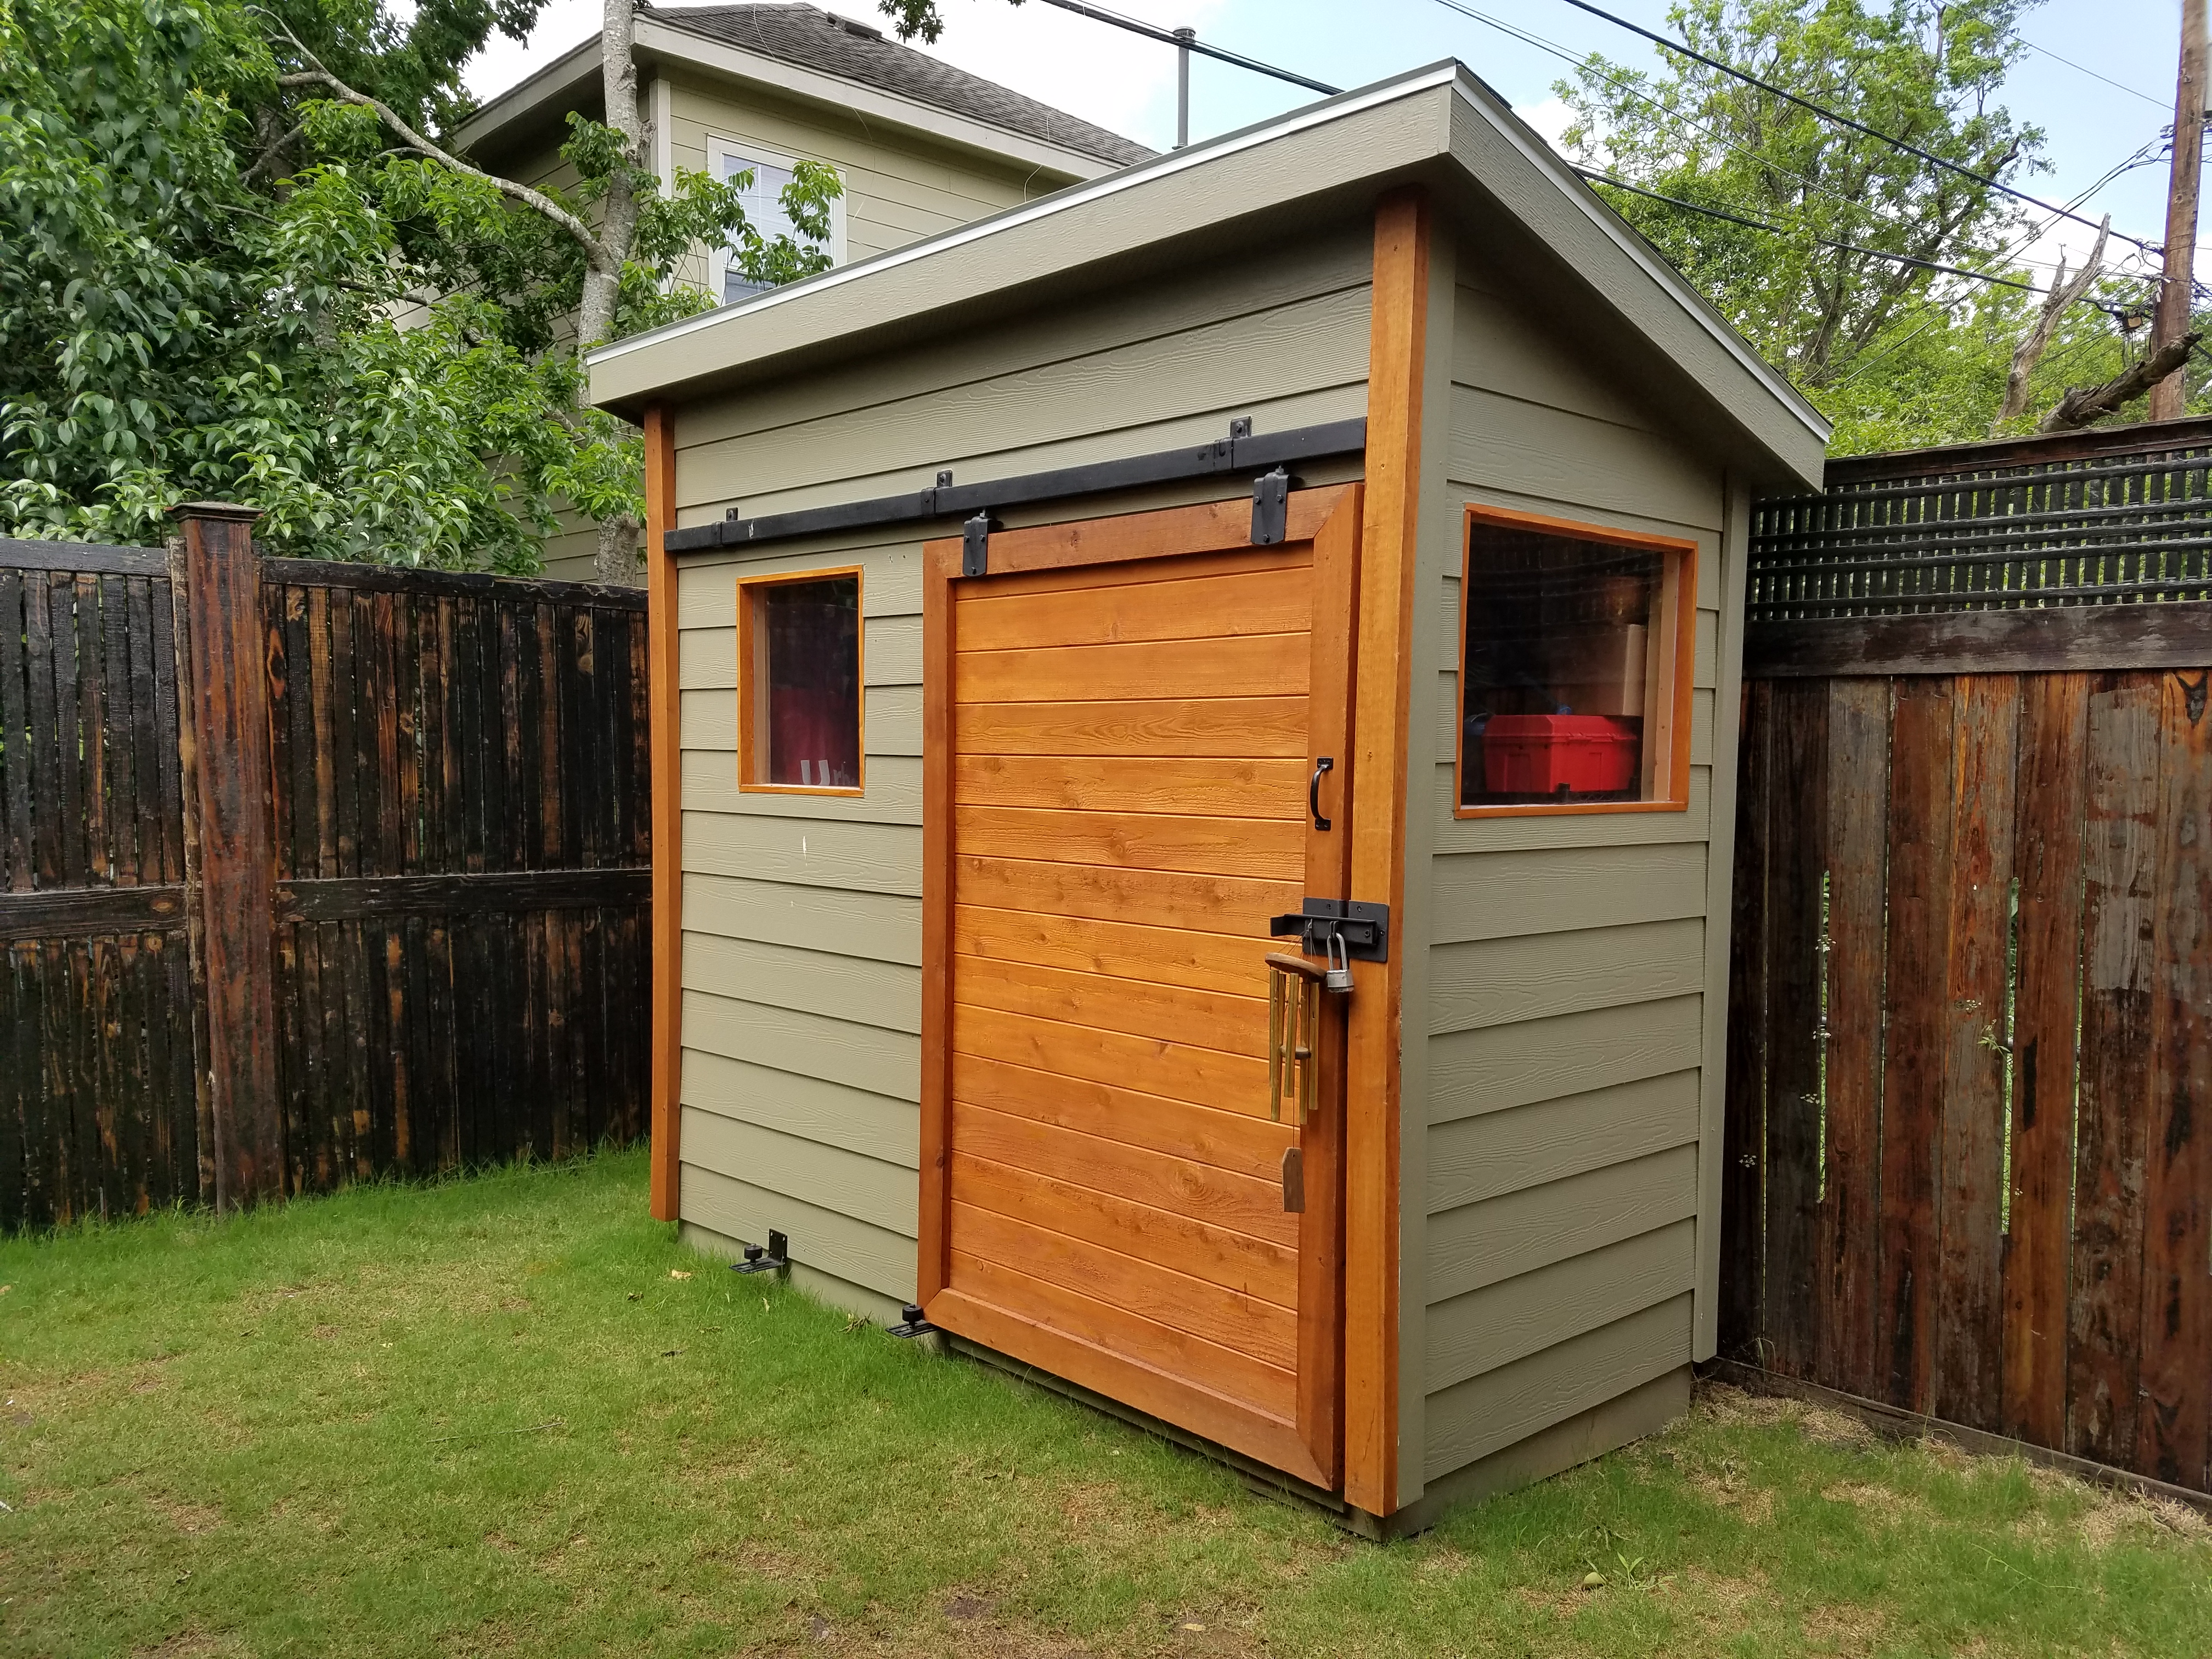 Pitch Roof Shed &amp; A 12x16 Premium Series Shed With 12 